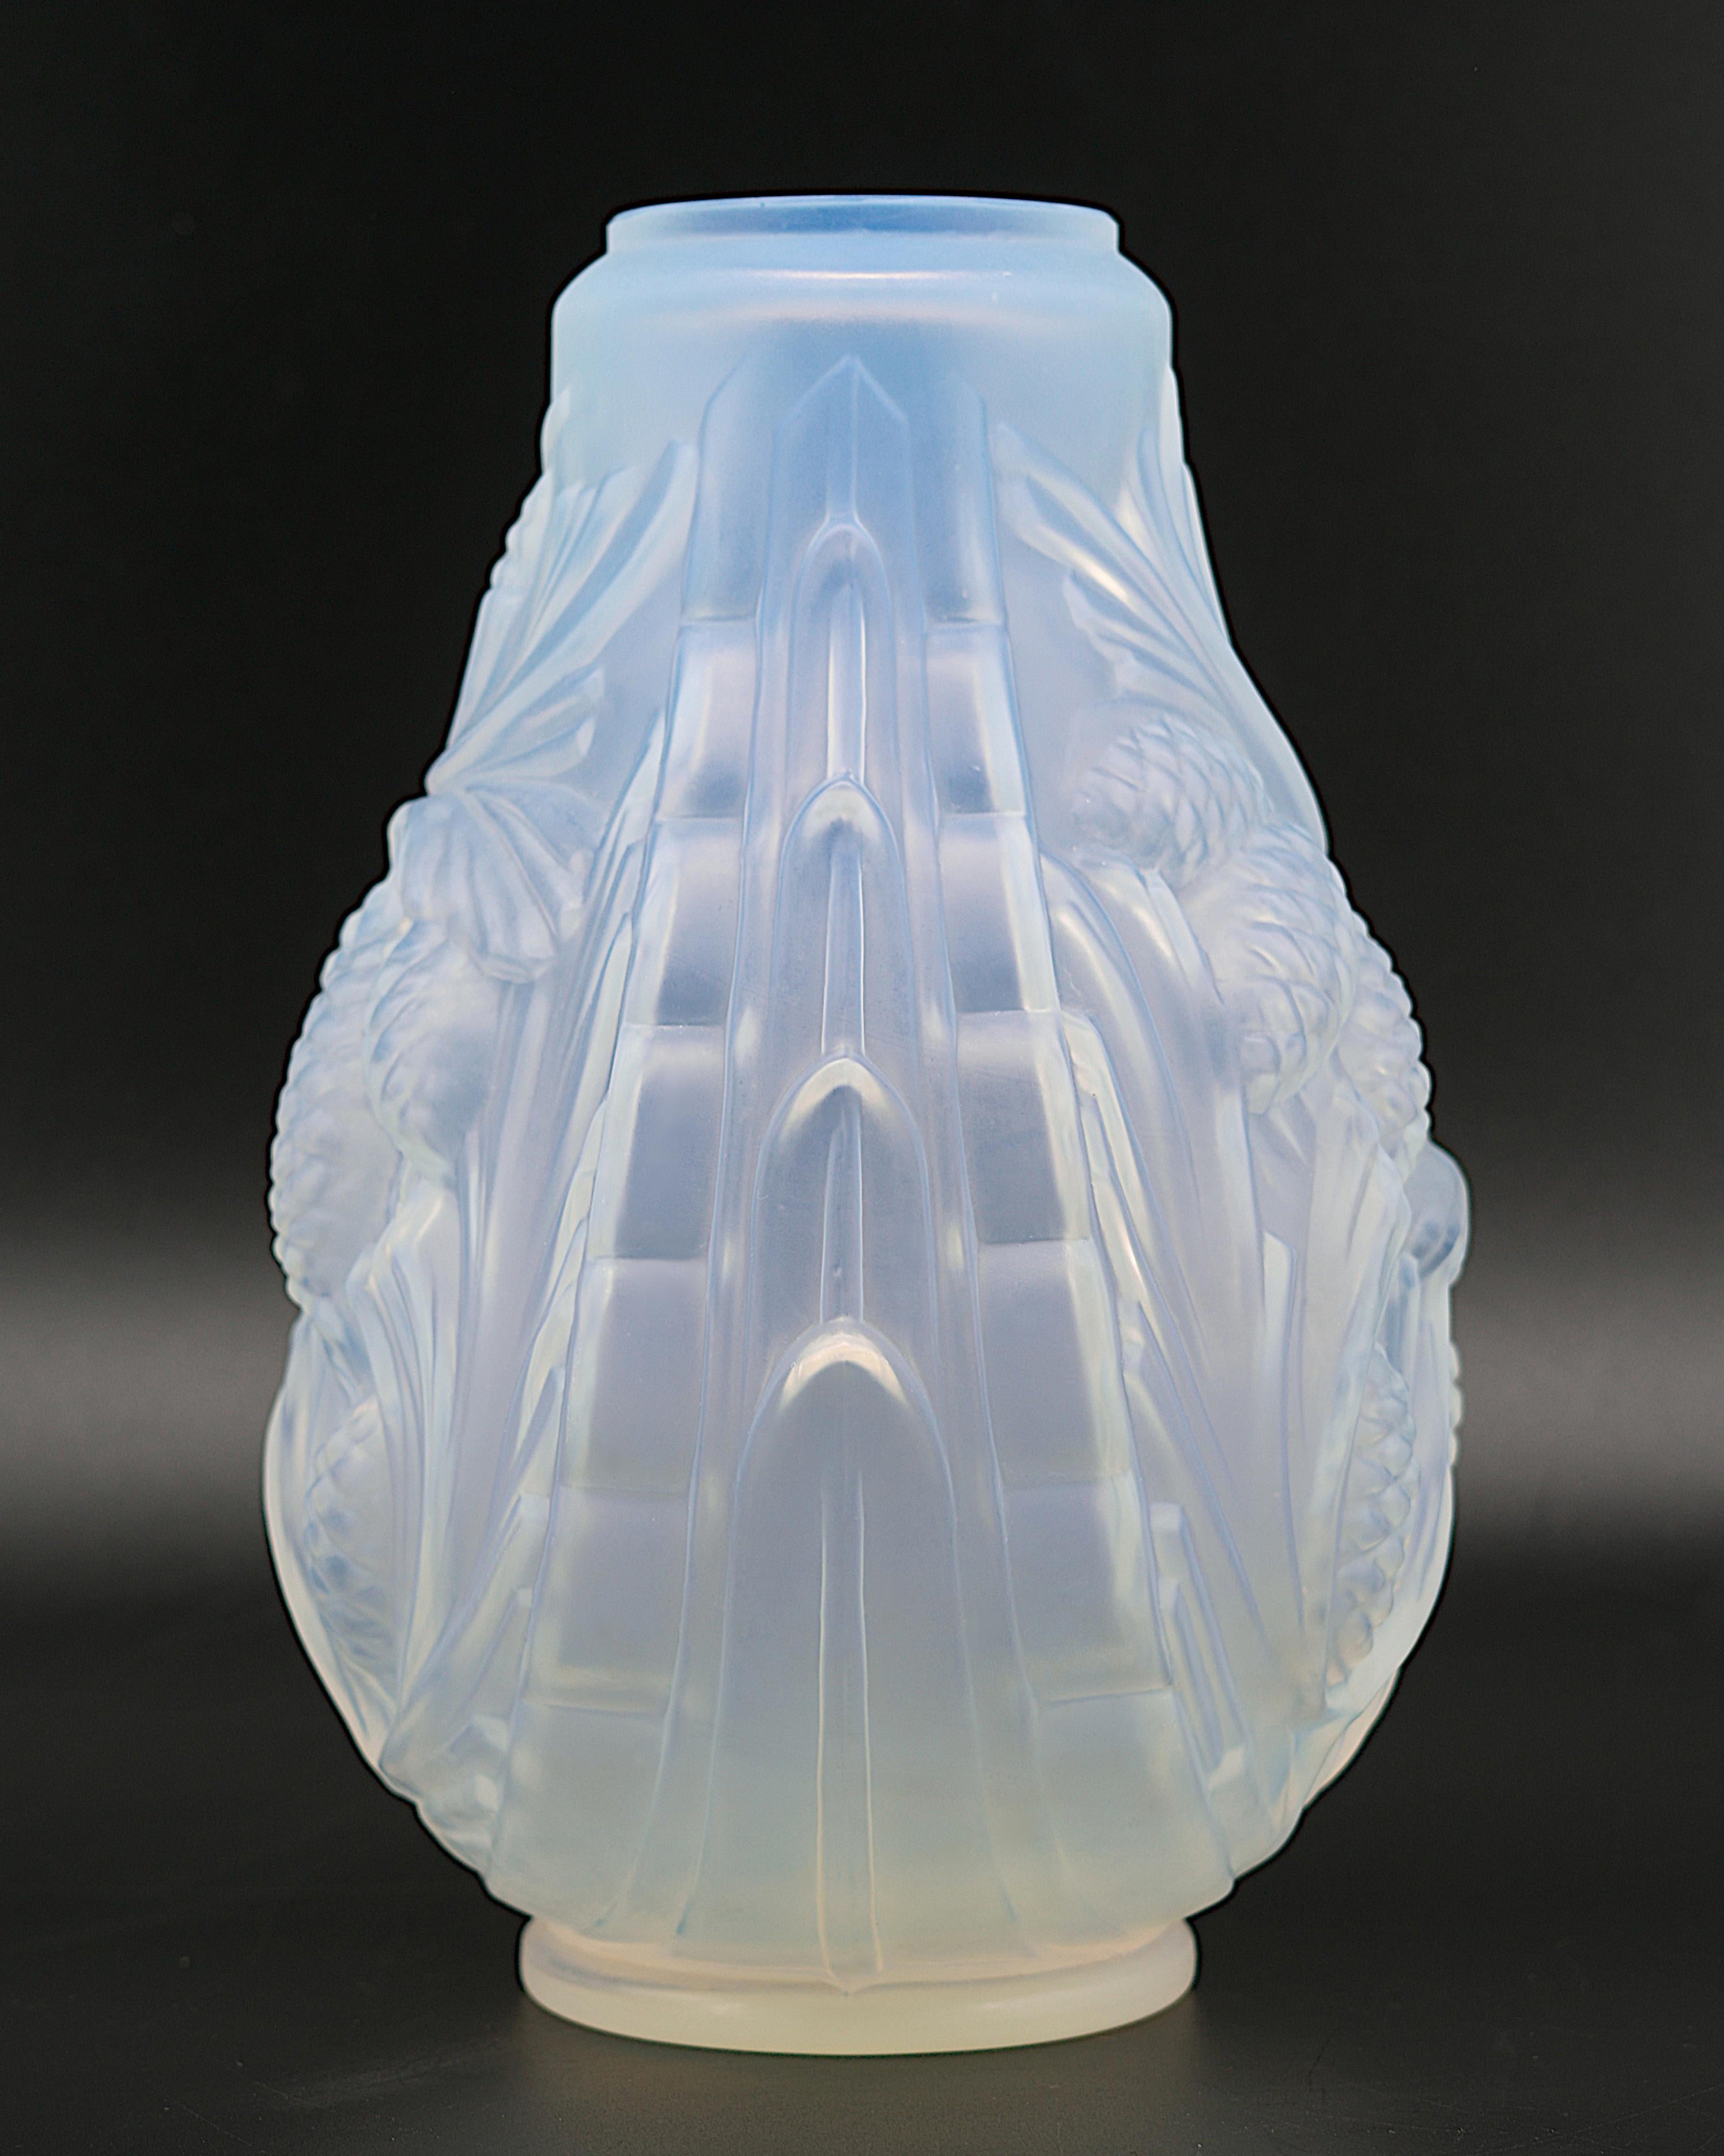 ETLING French Art Deco Frosted Glass Vase, 1930 For Sale 2